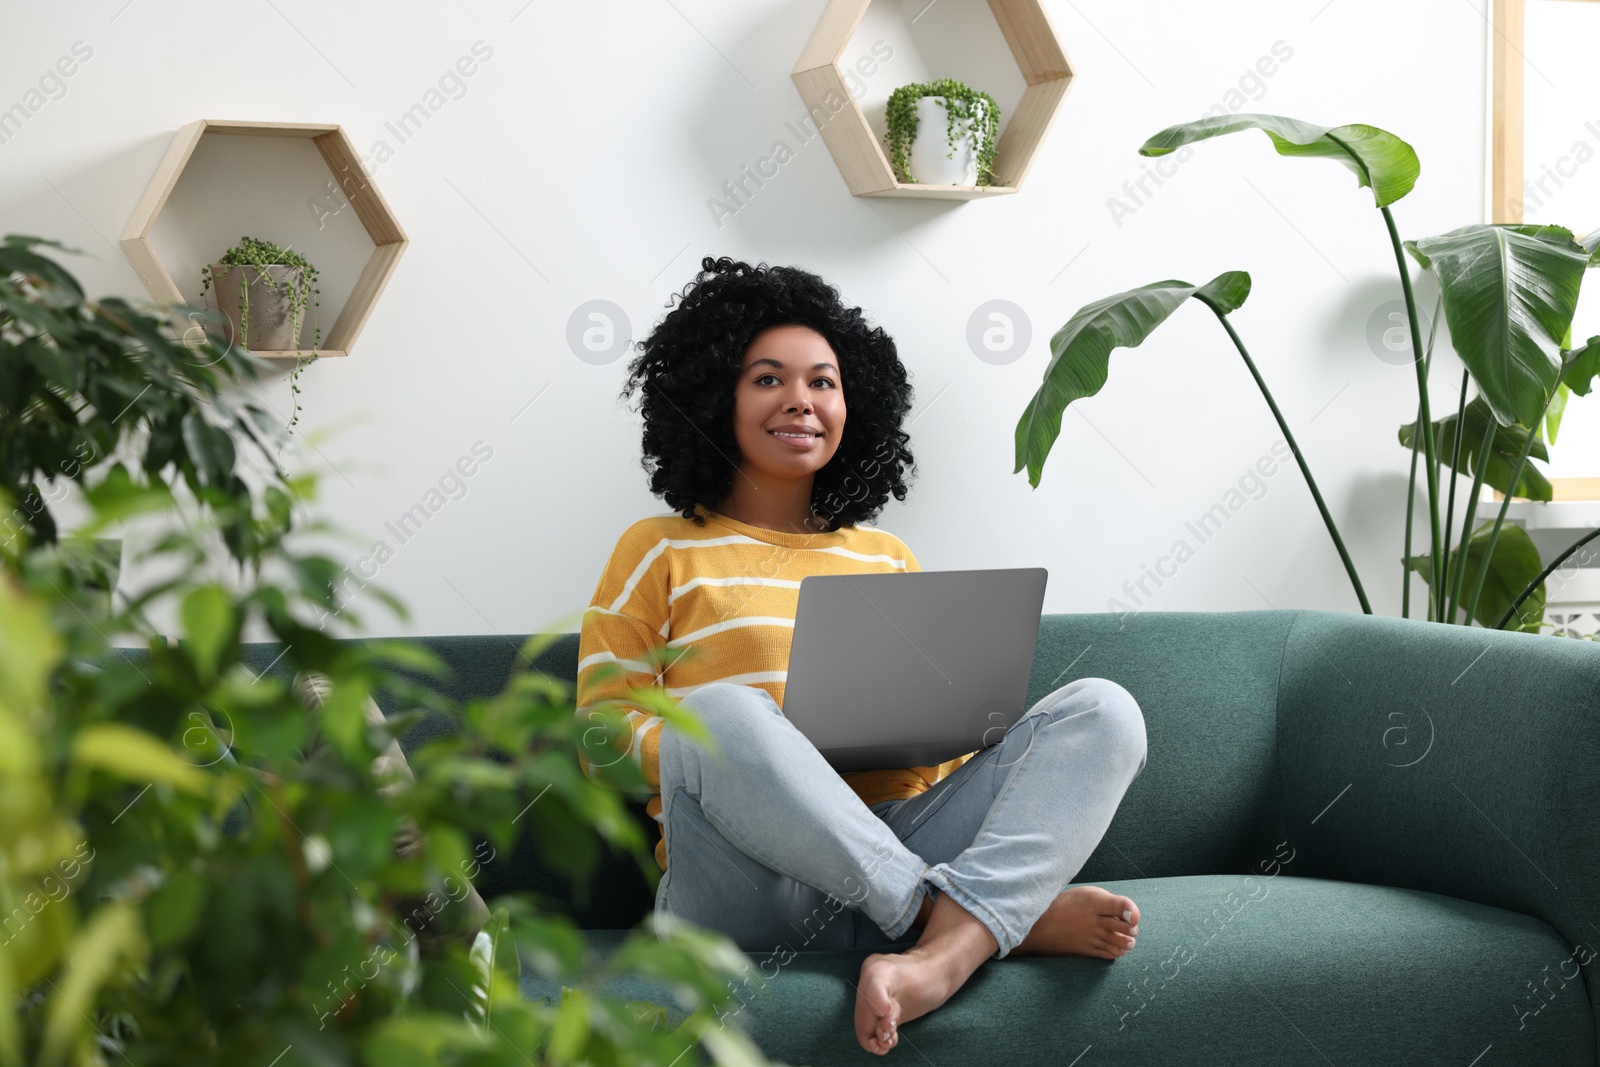 Photo of Relaxing atmosphere. Happy woman with laptop on sofa near beautiful houseplants in room